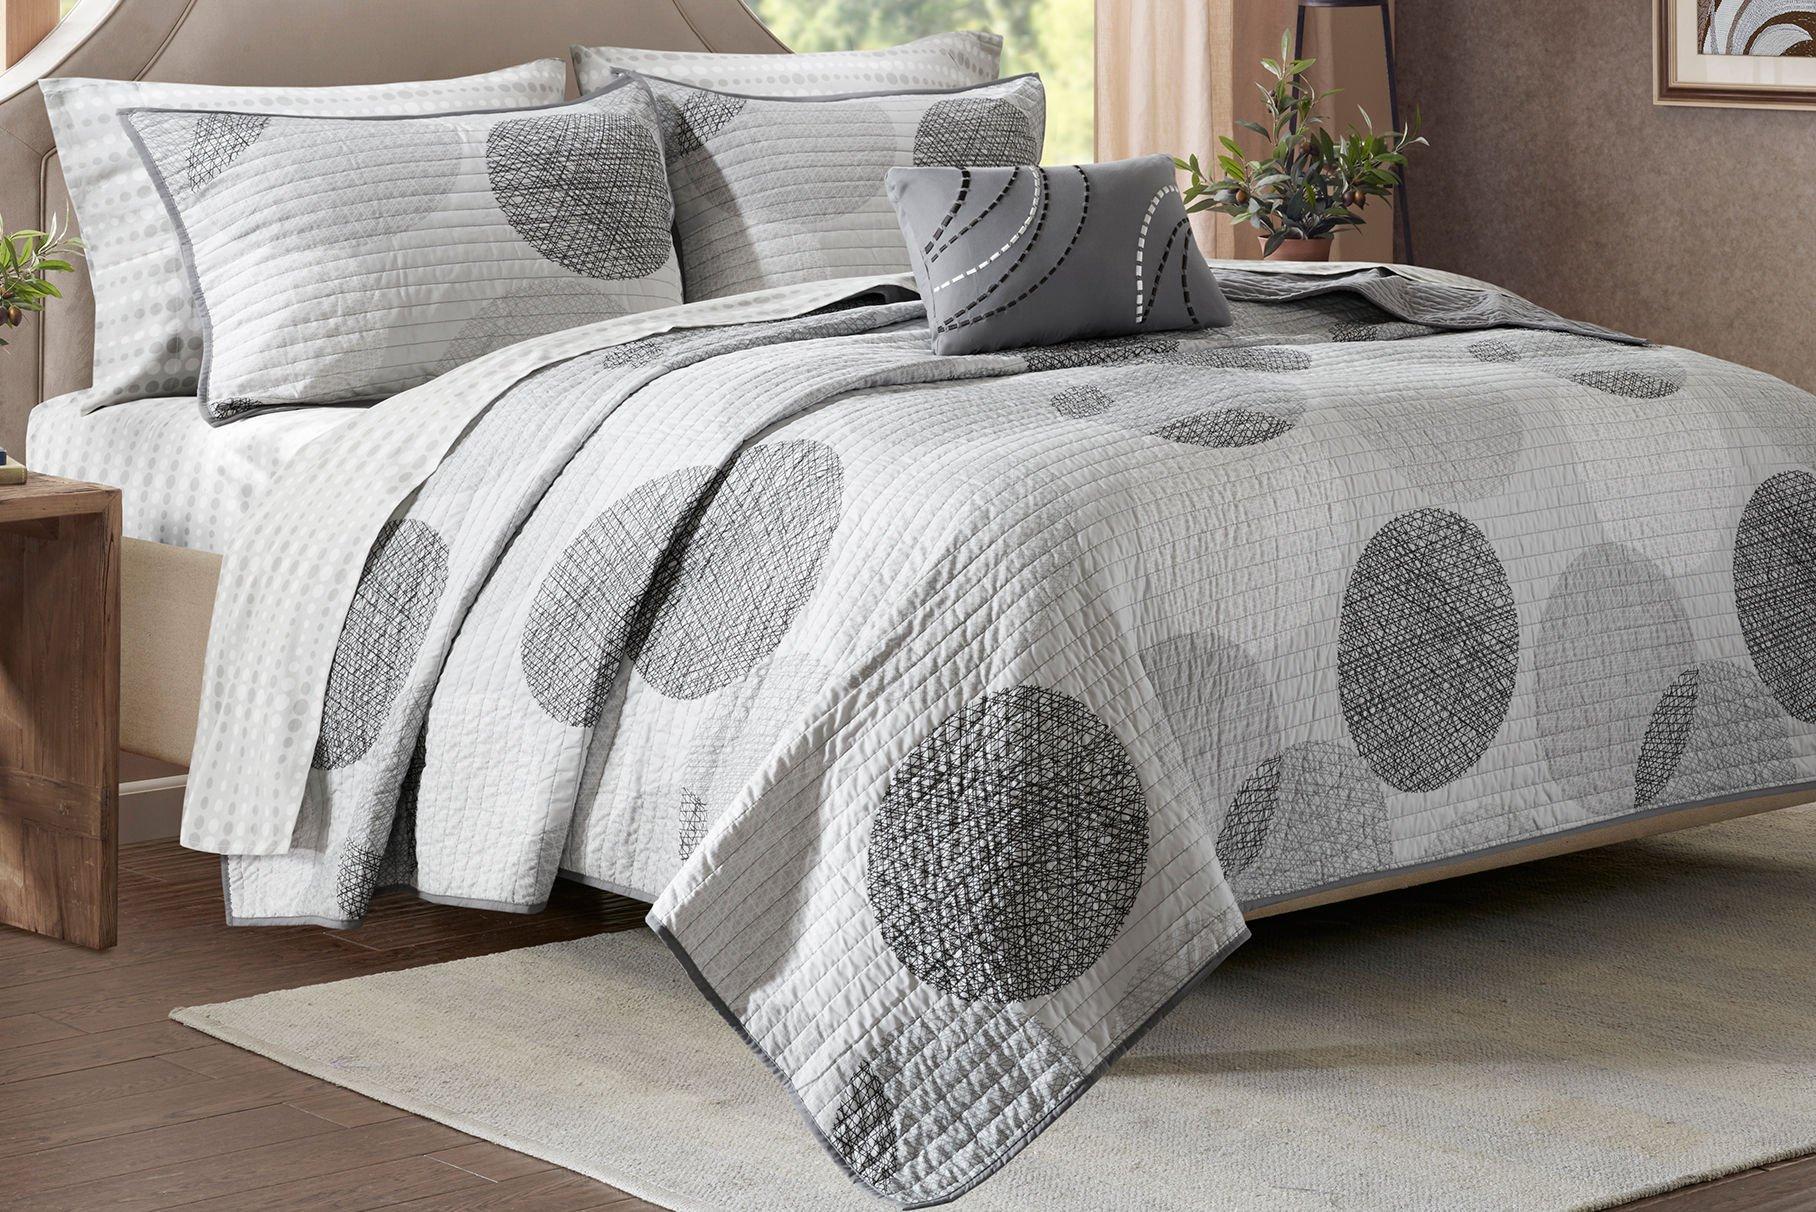 Madison Park Knowles Grey Coverlet Set